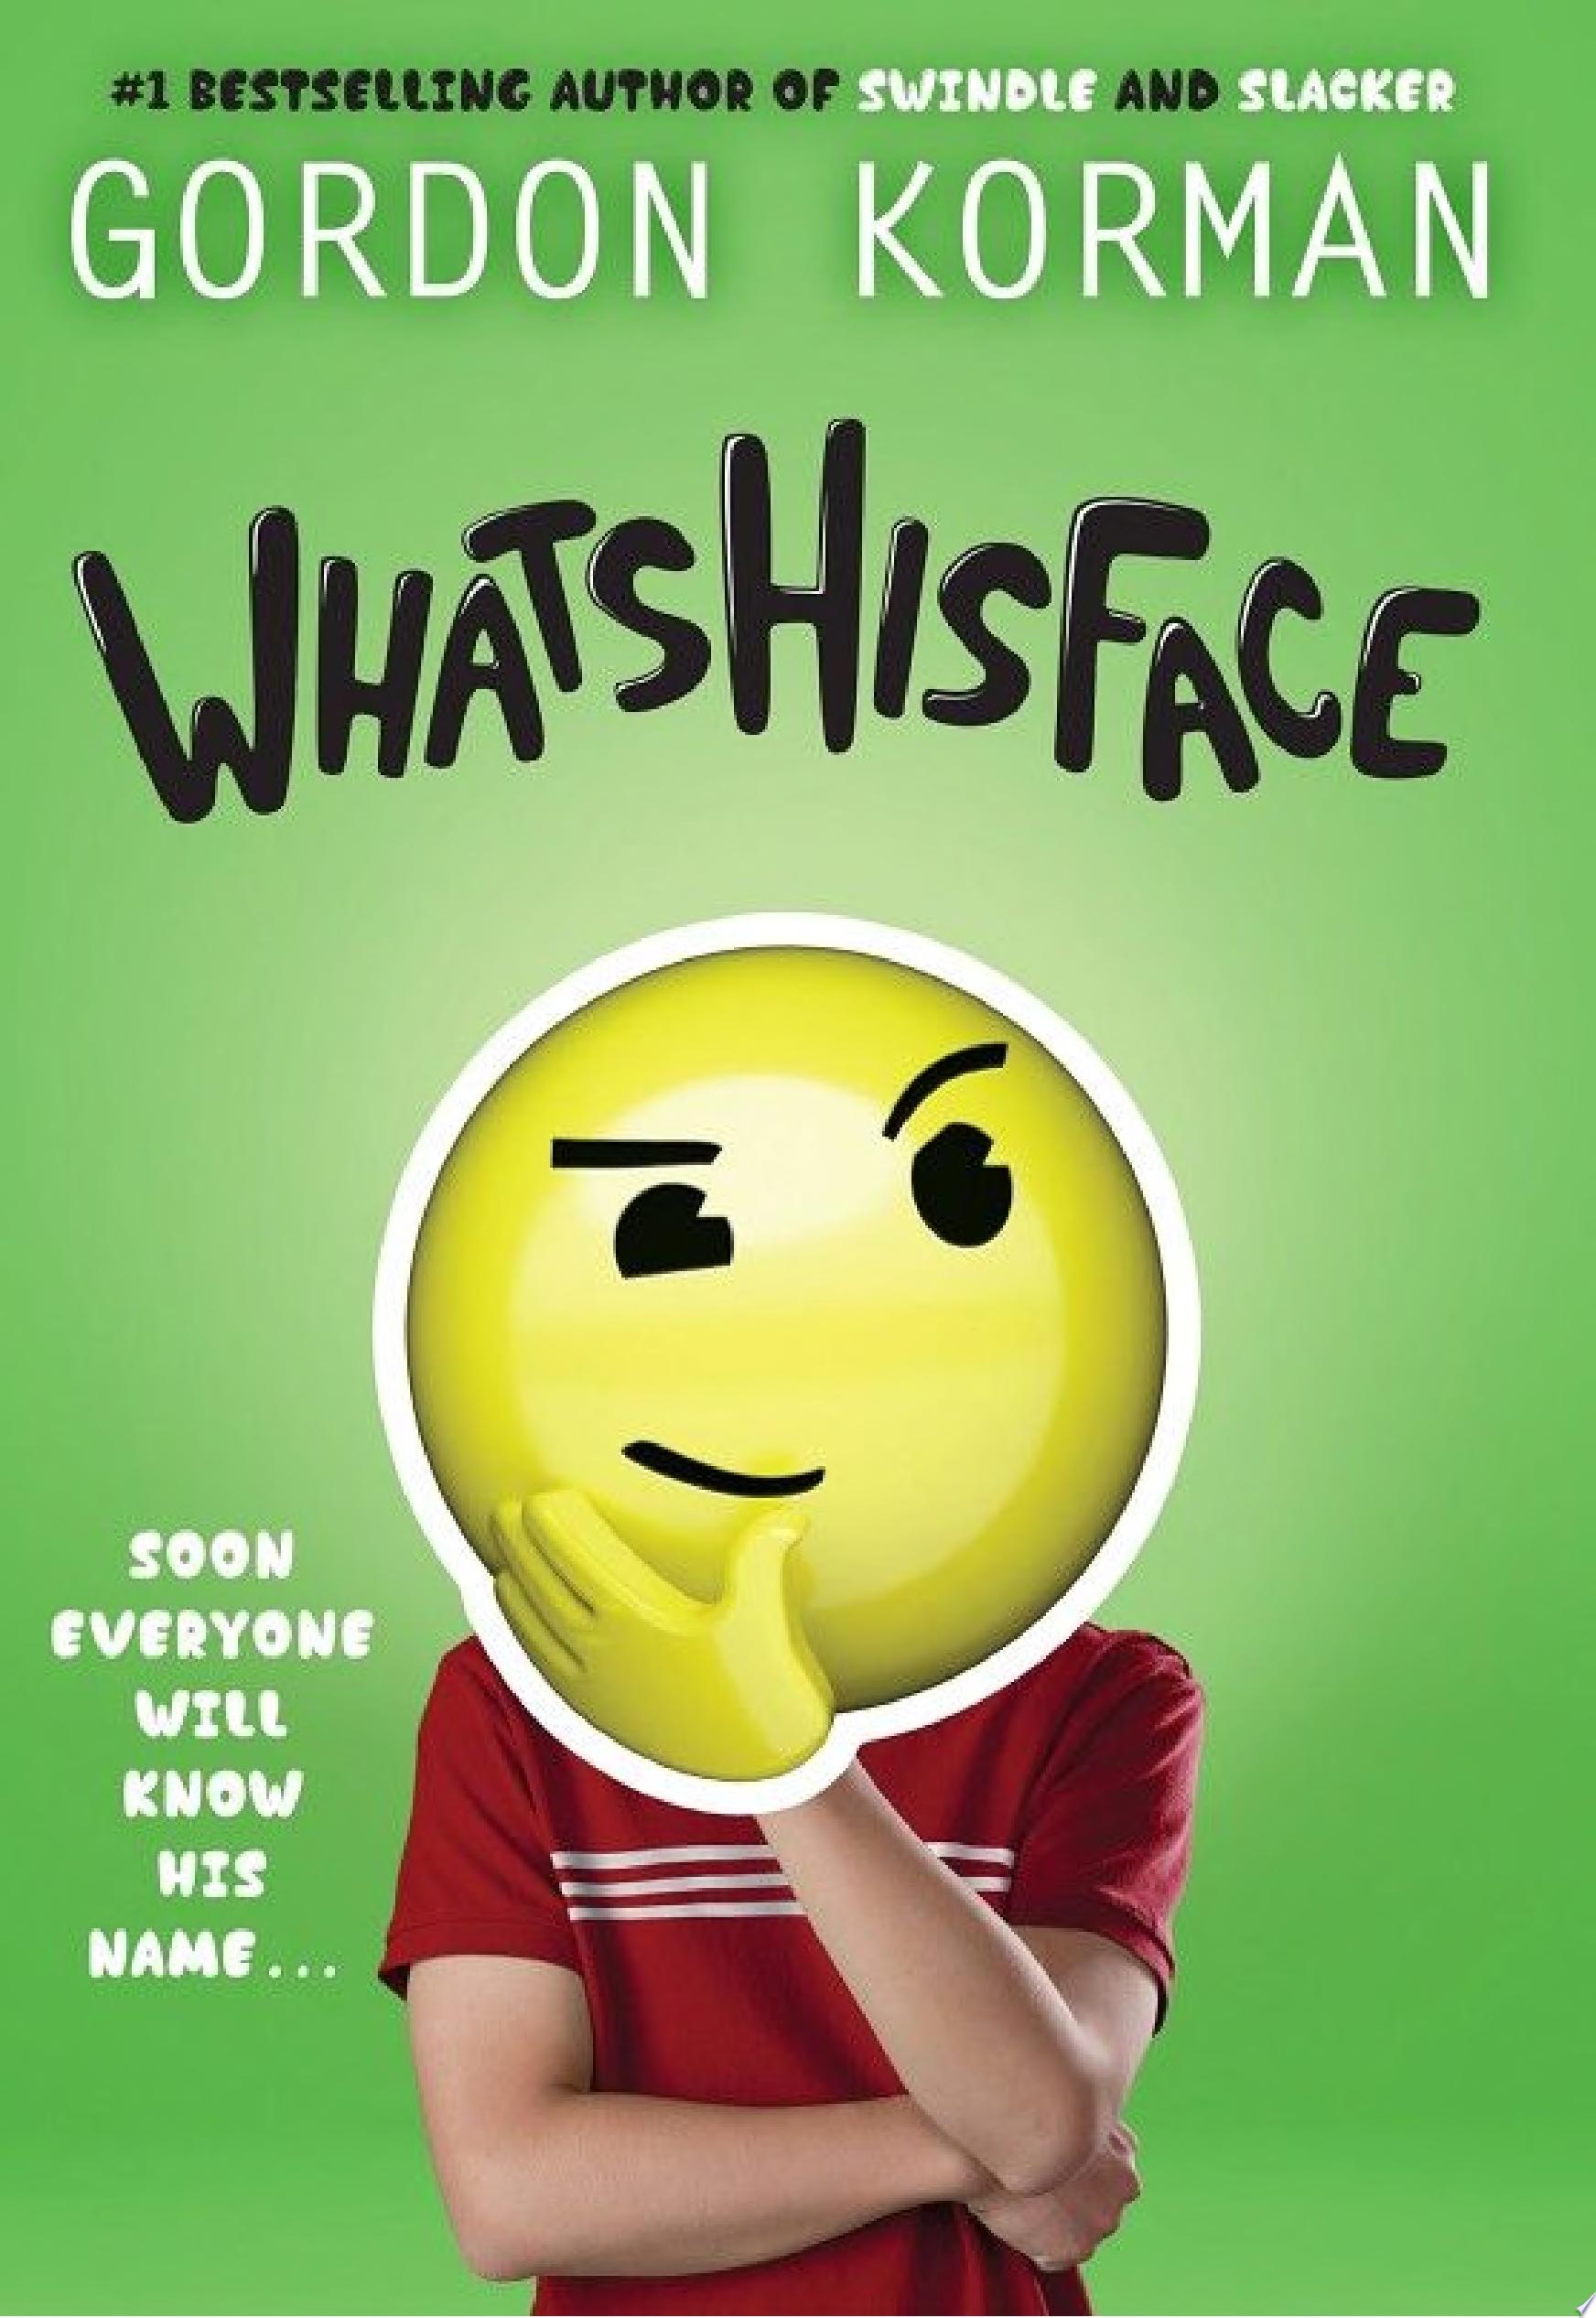 Image for "Whatshisface"